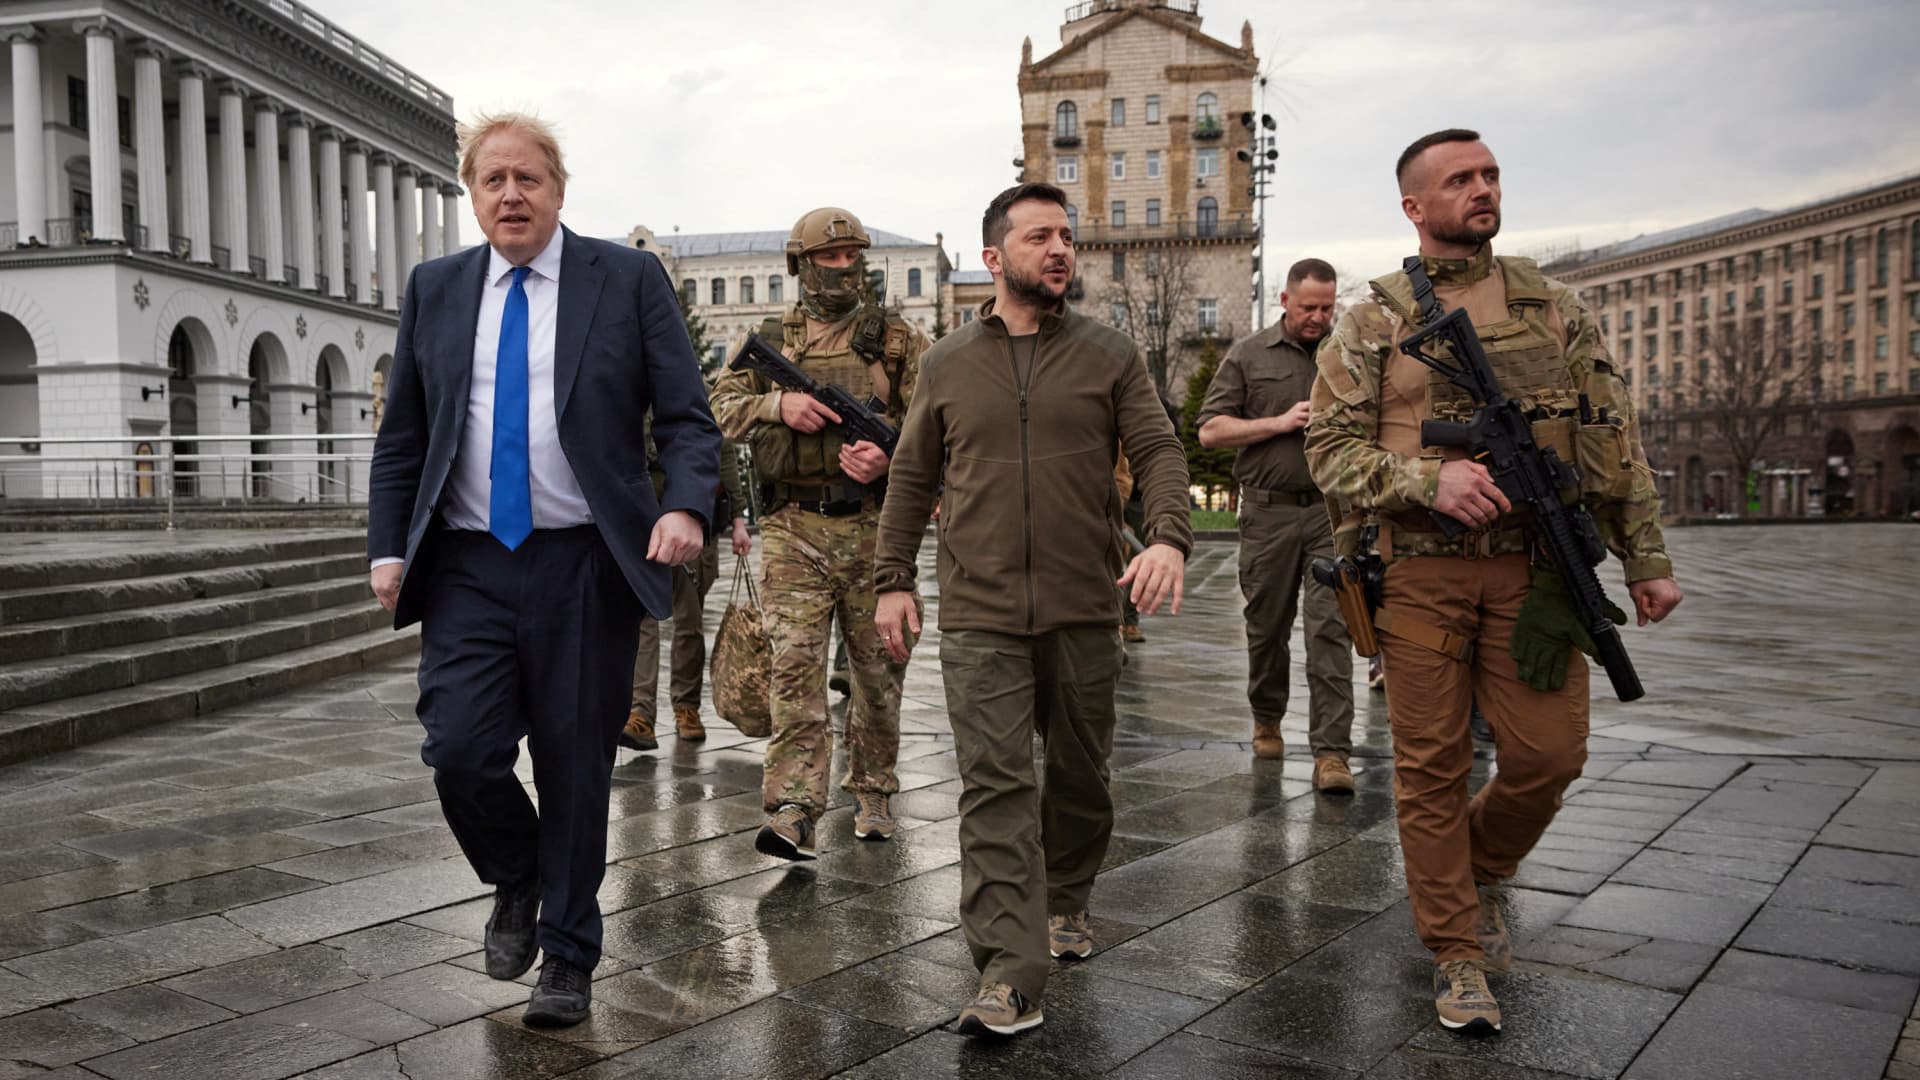 Ukraine's President Volodymyr Zelenskyy and British Prime Minister Boris Johnson walk at the Independence Square after a meeting, as Russia's attack on Ukraine continues, in Kyiv, Ukraine April 9, 2022.